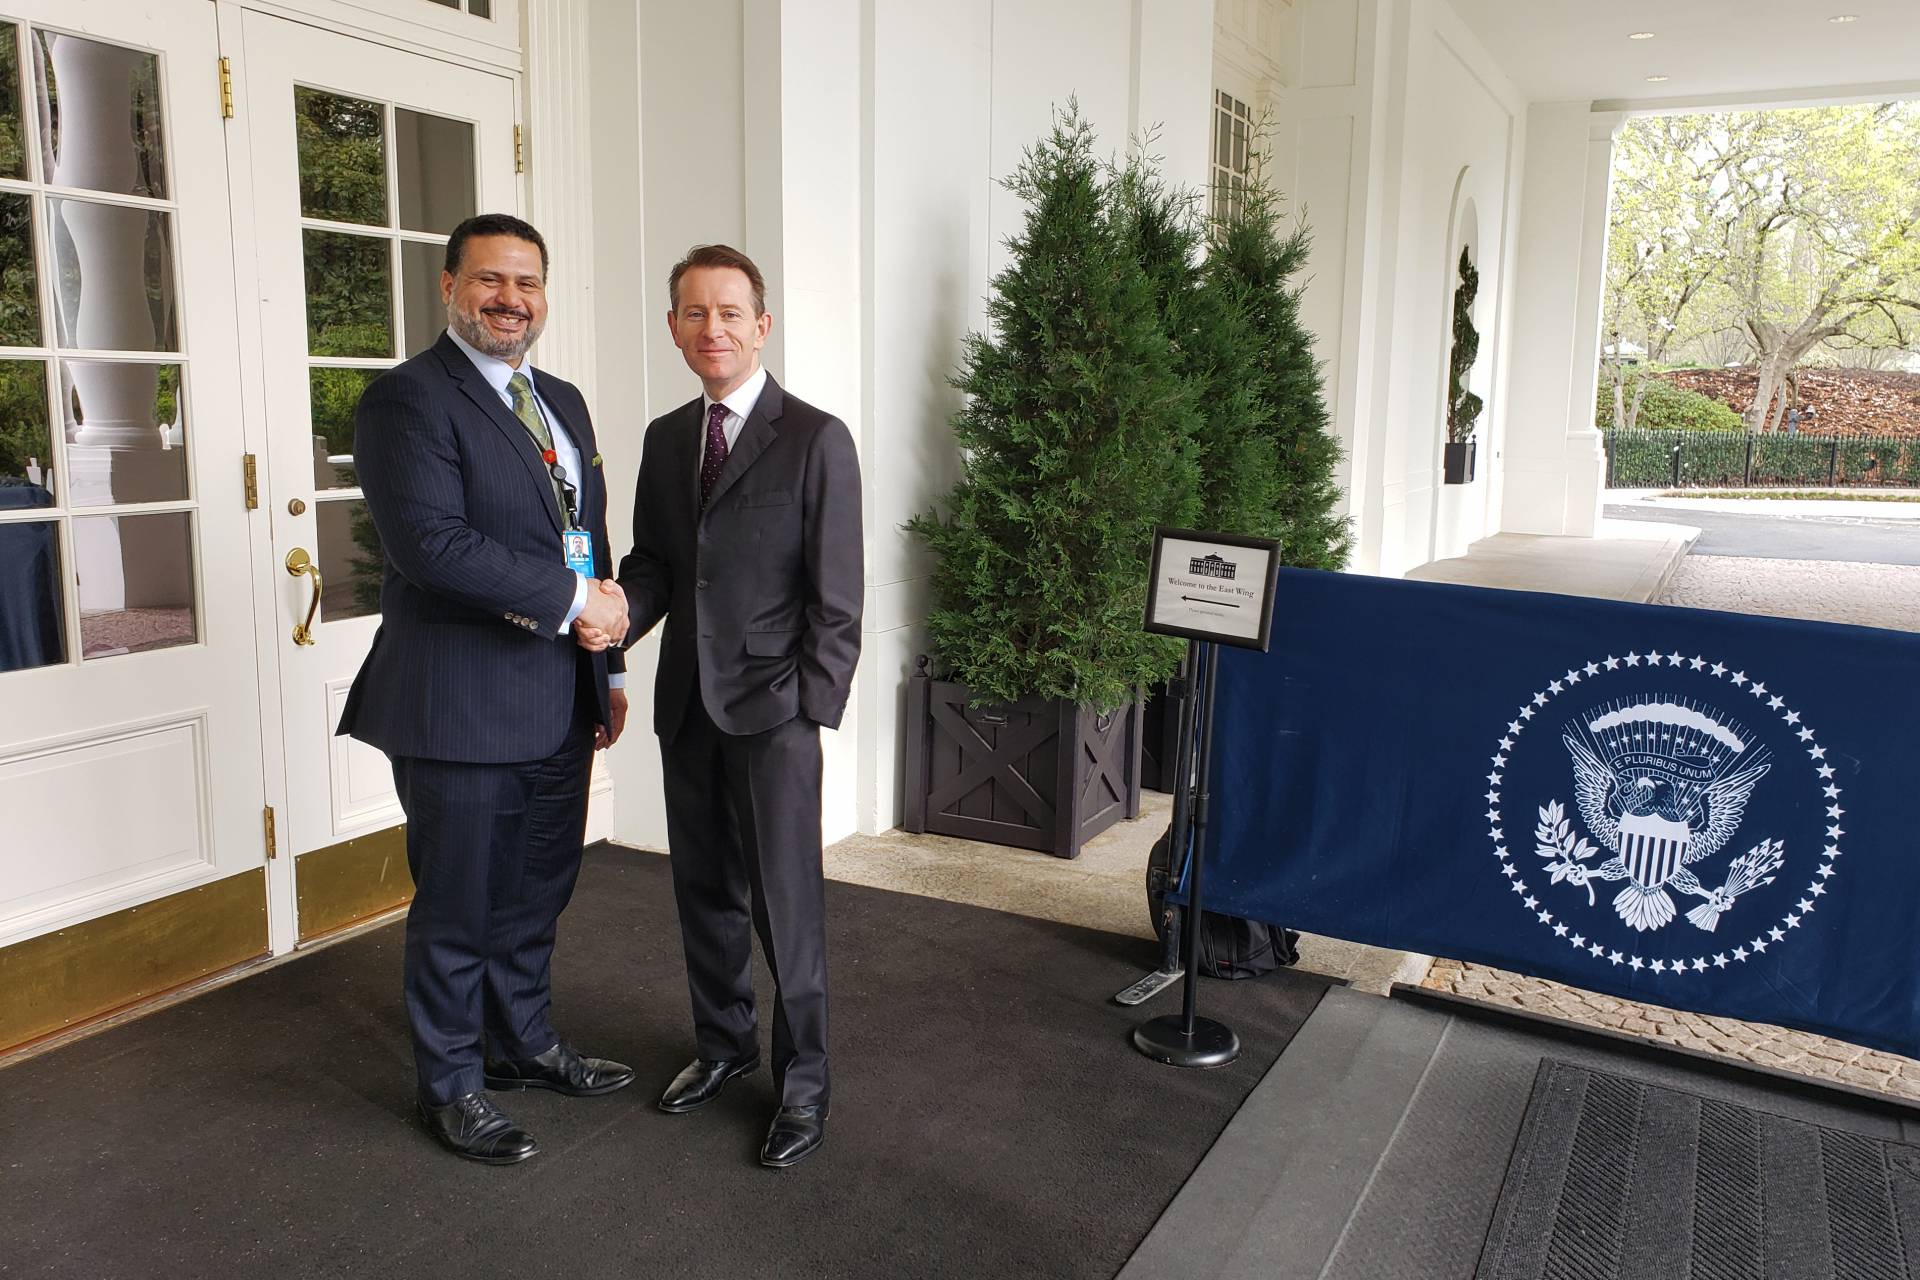 THOR CEO James Carroll at the White House to talk about health technology policy